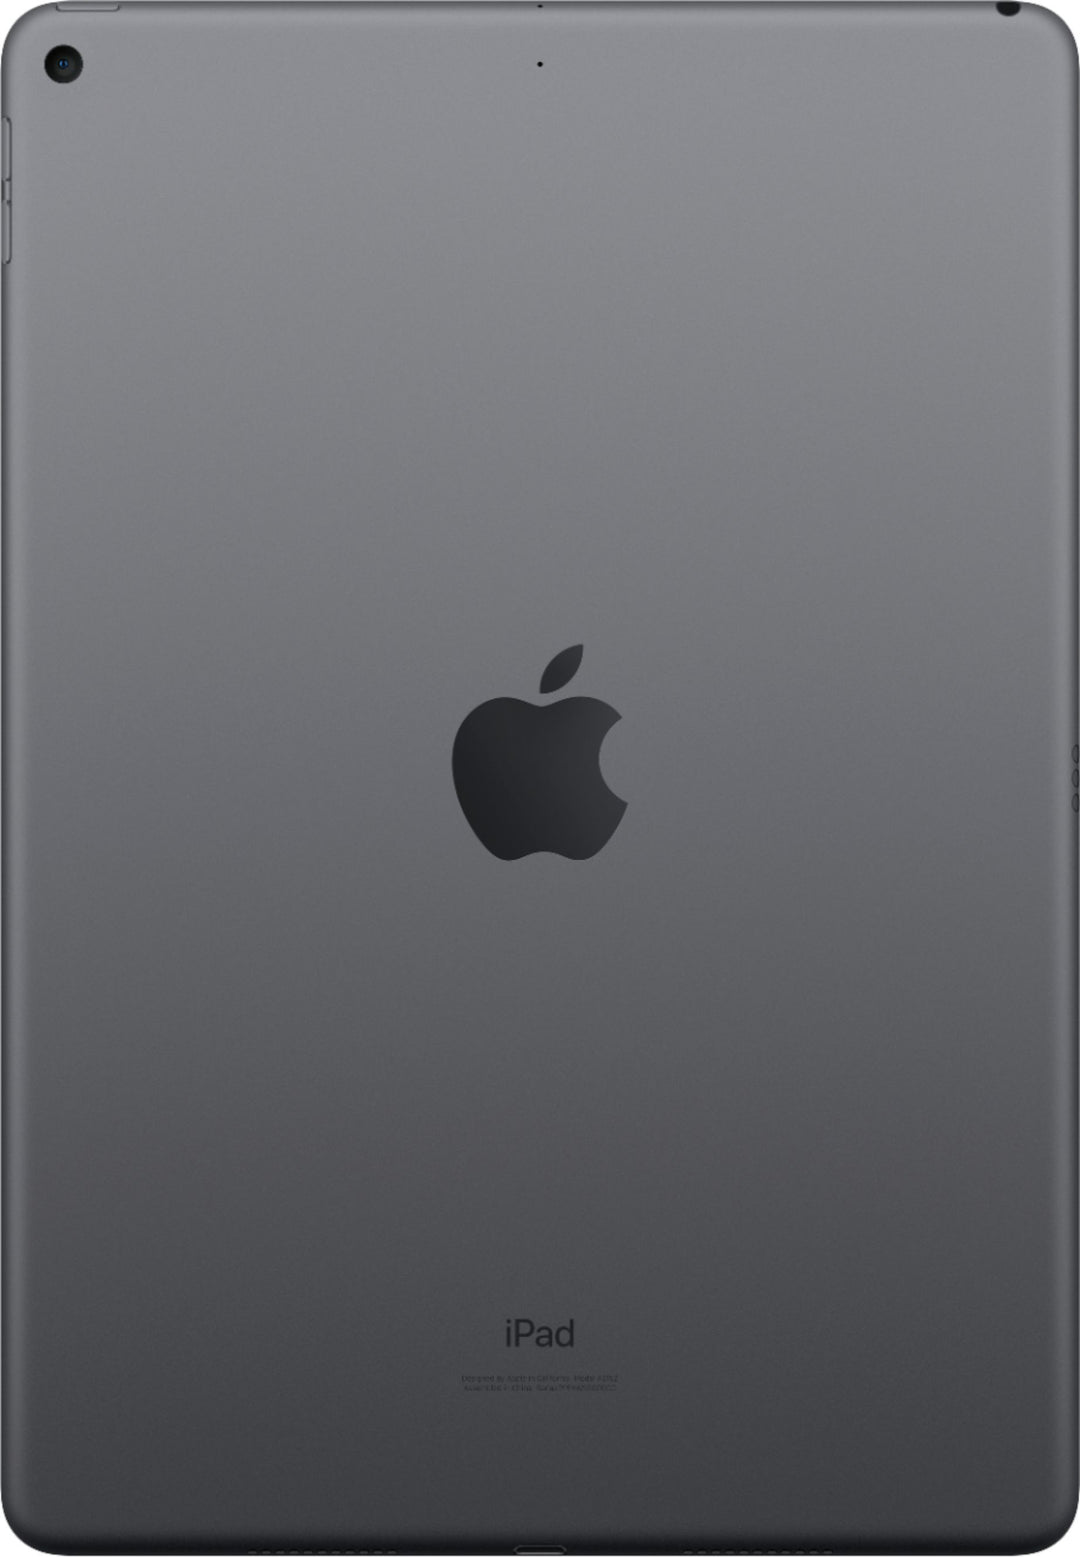 Apple - Geek Squad Certified Refurbished iPad Air (Latest Model) with Wi-Fi - 64GB - Space Gray_4